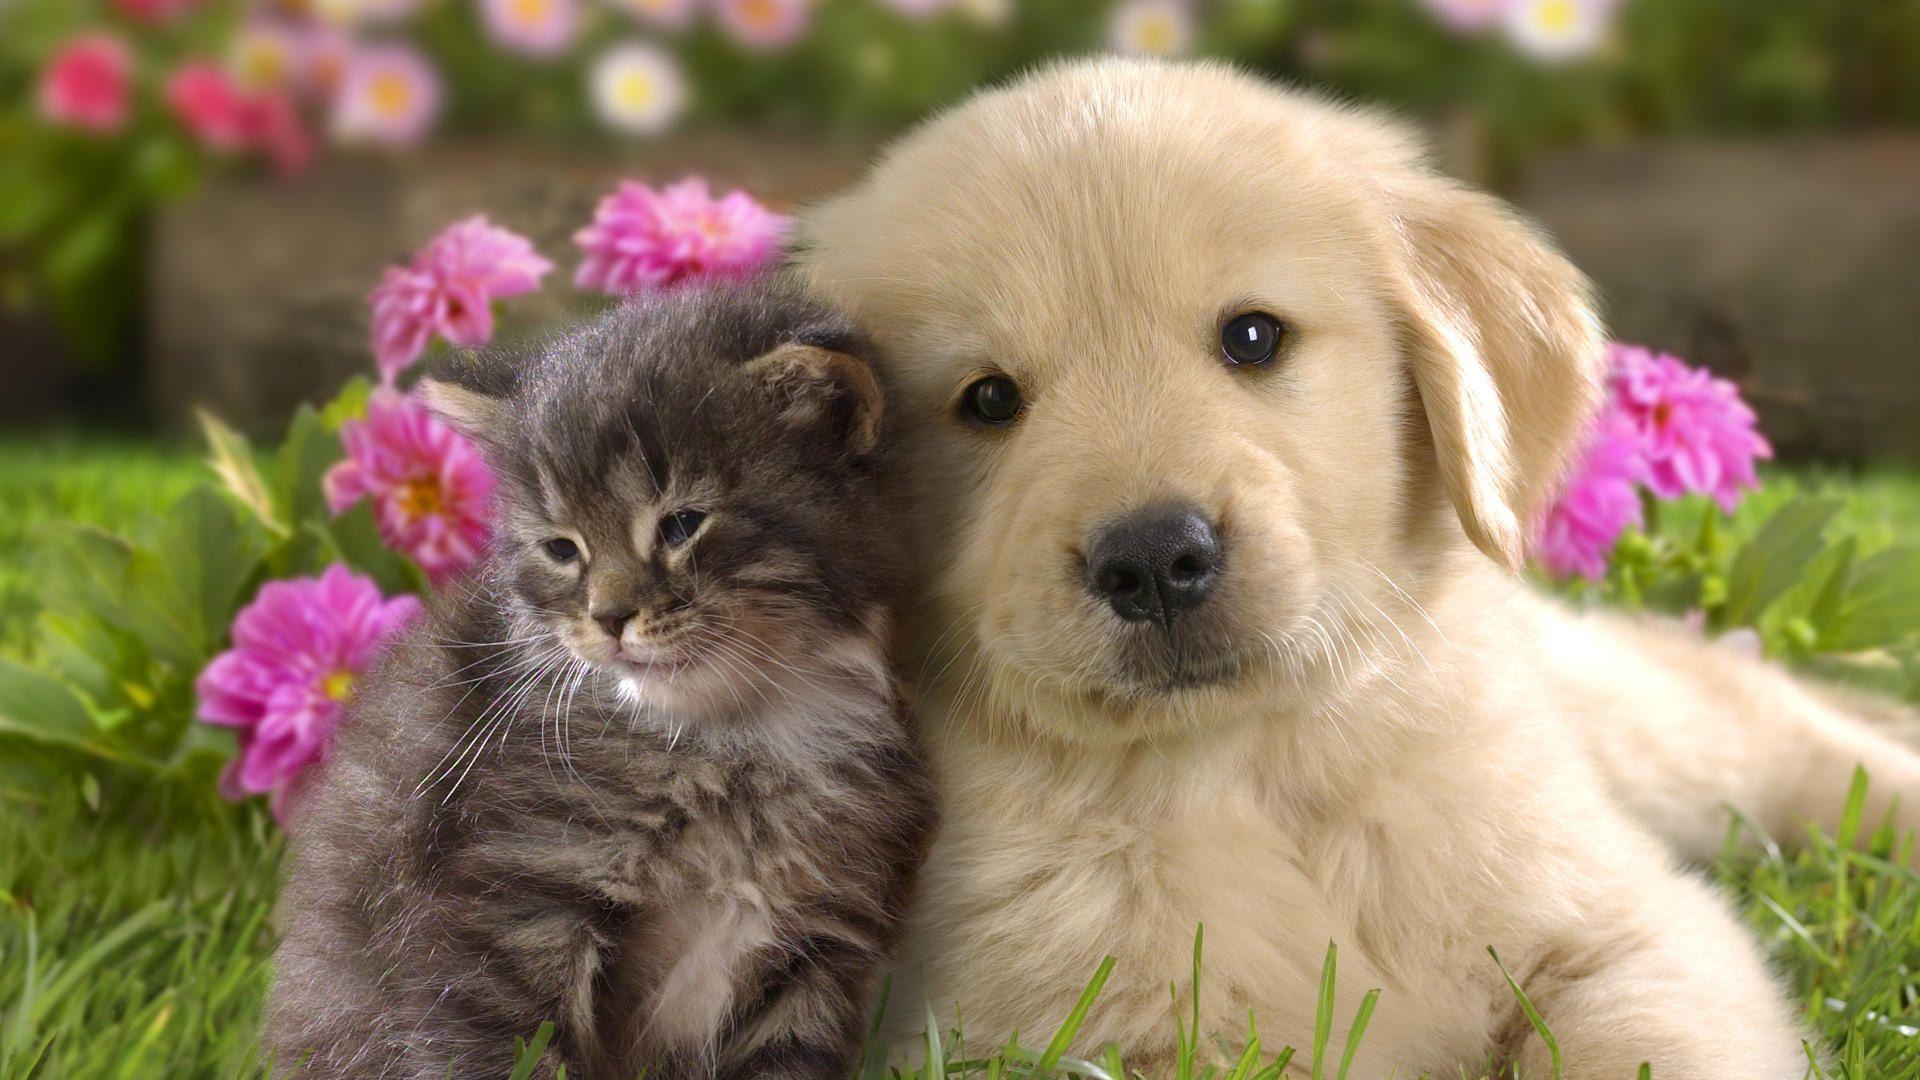 Cute Cat And Dog Wallpapers - Puppy Background - 1920x1080 Wallpaper -  